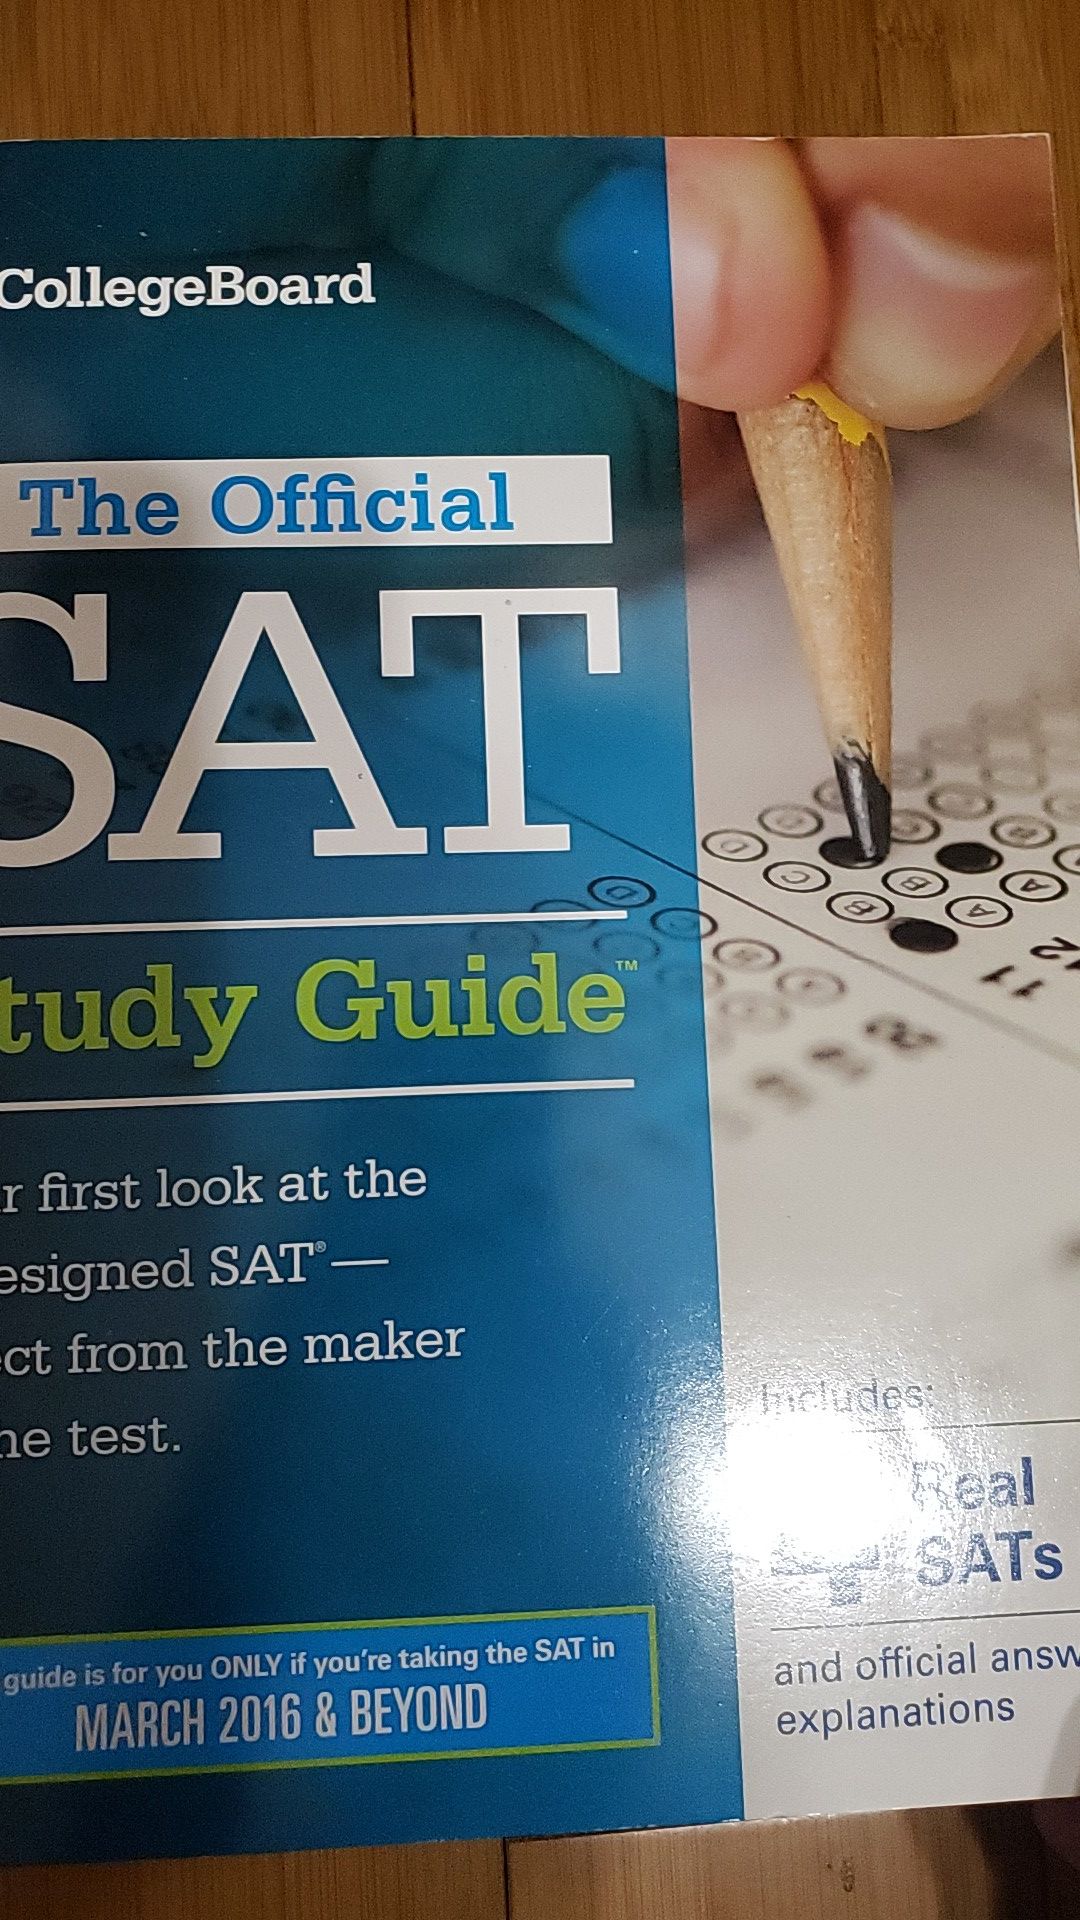 The Official SAT Study Guide by CollegeBoard